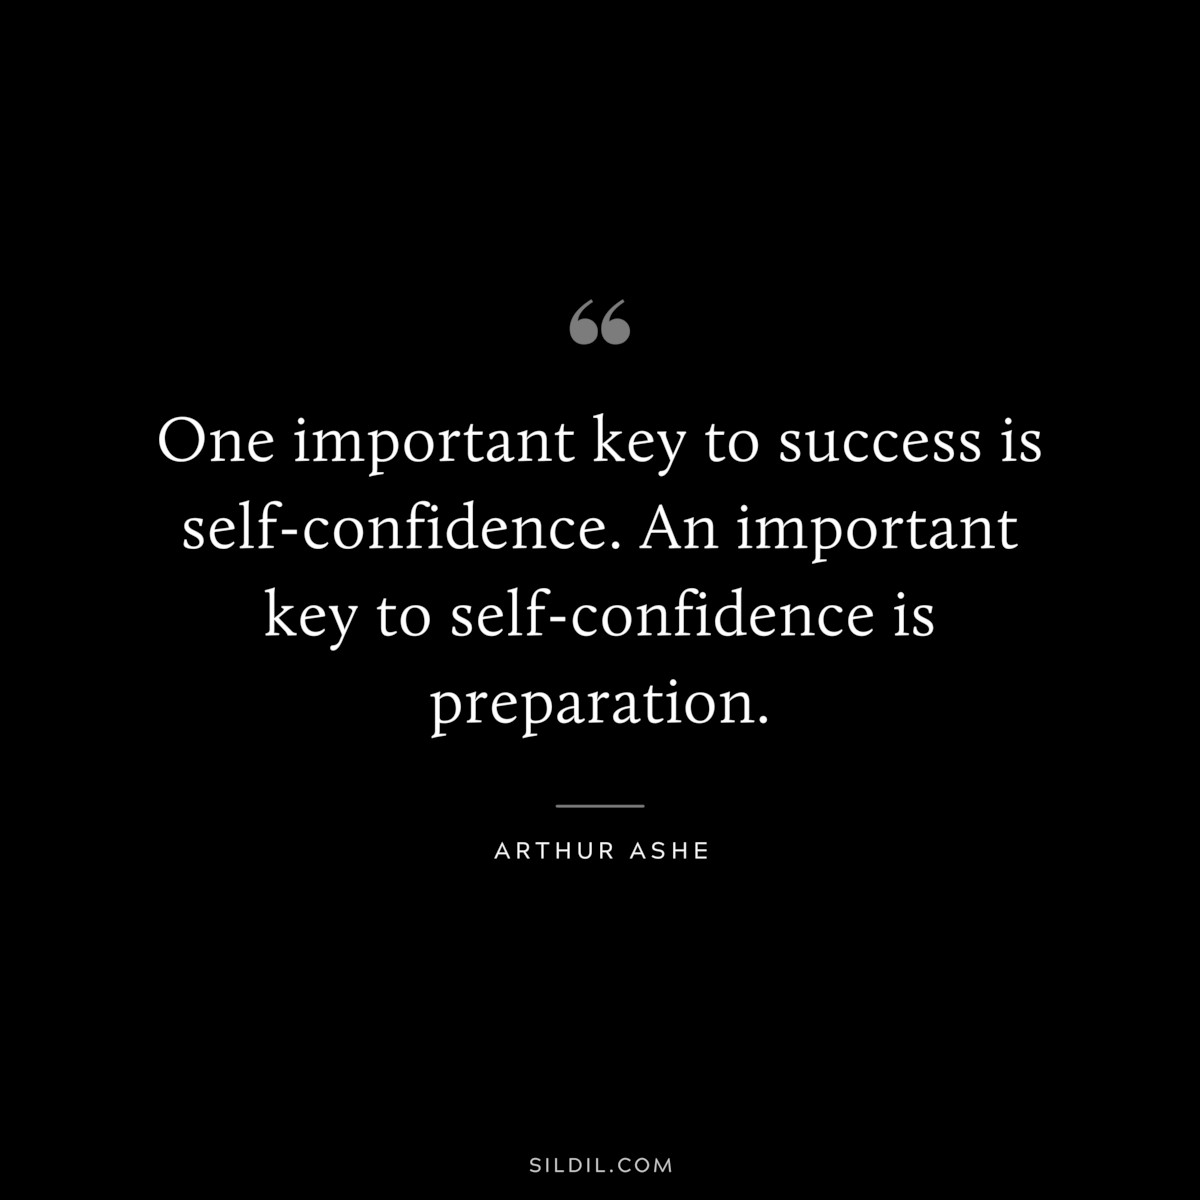 One important key to success is self-confidence. An important key to self-confidence is preparation. ― Arthur Ashe